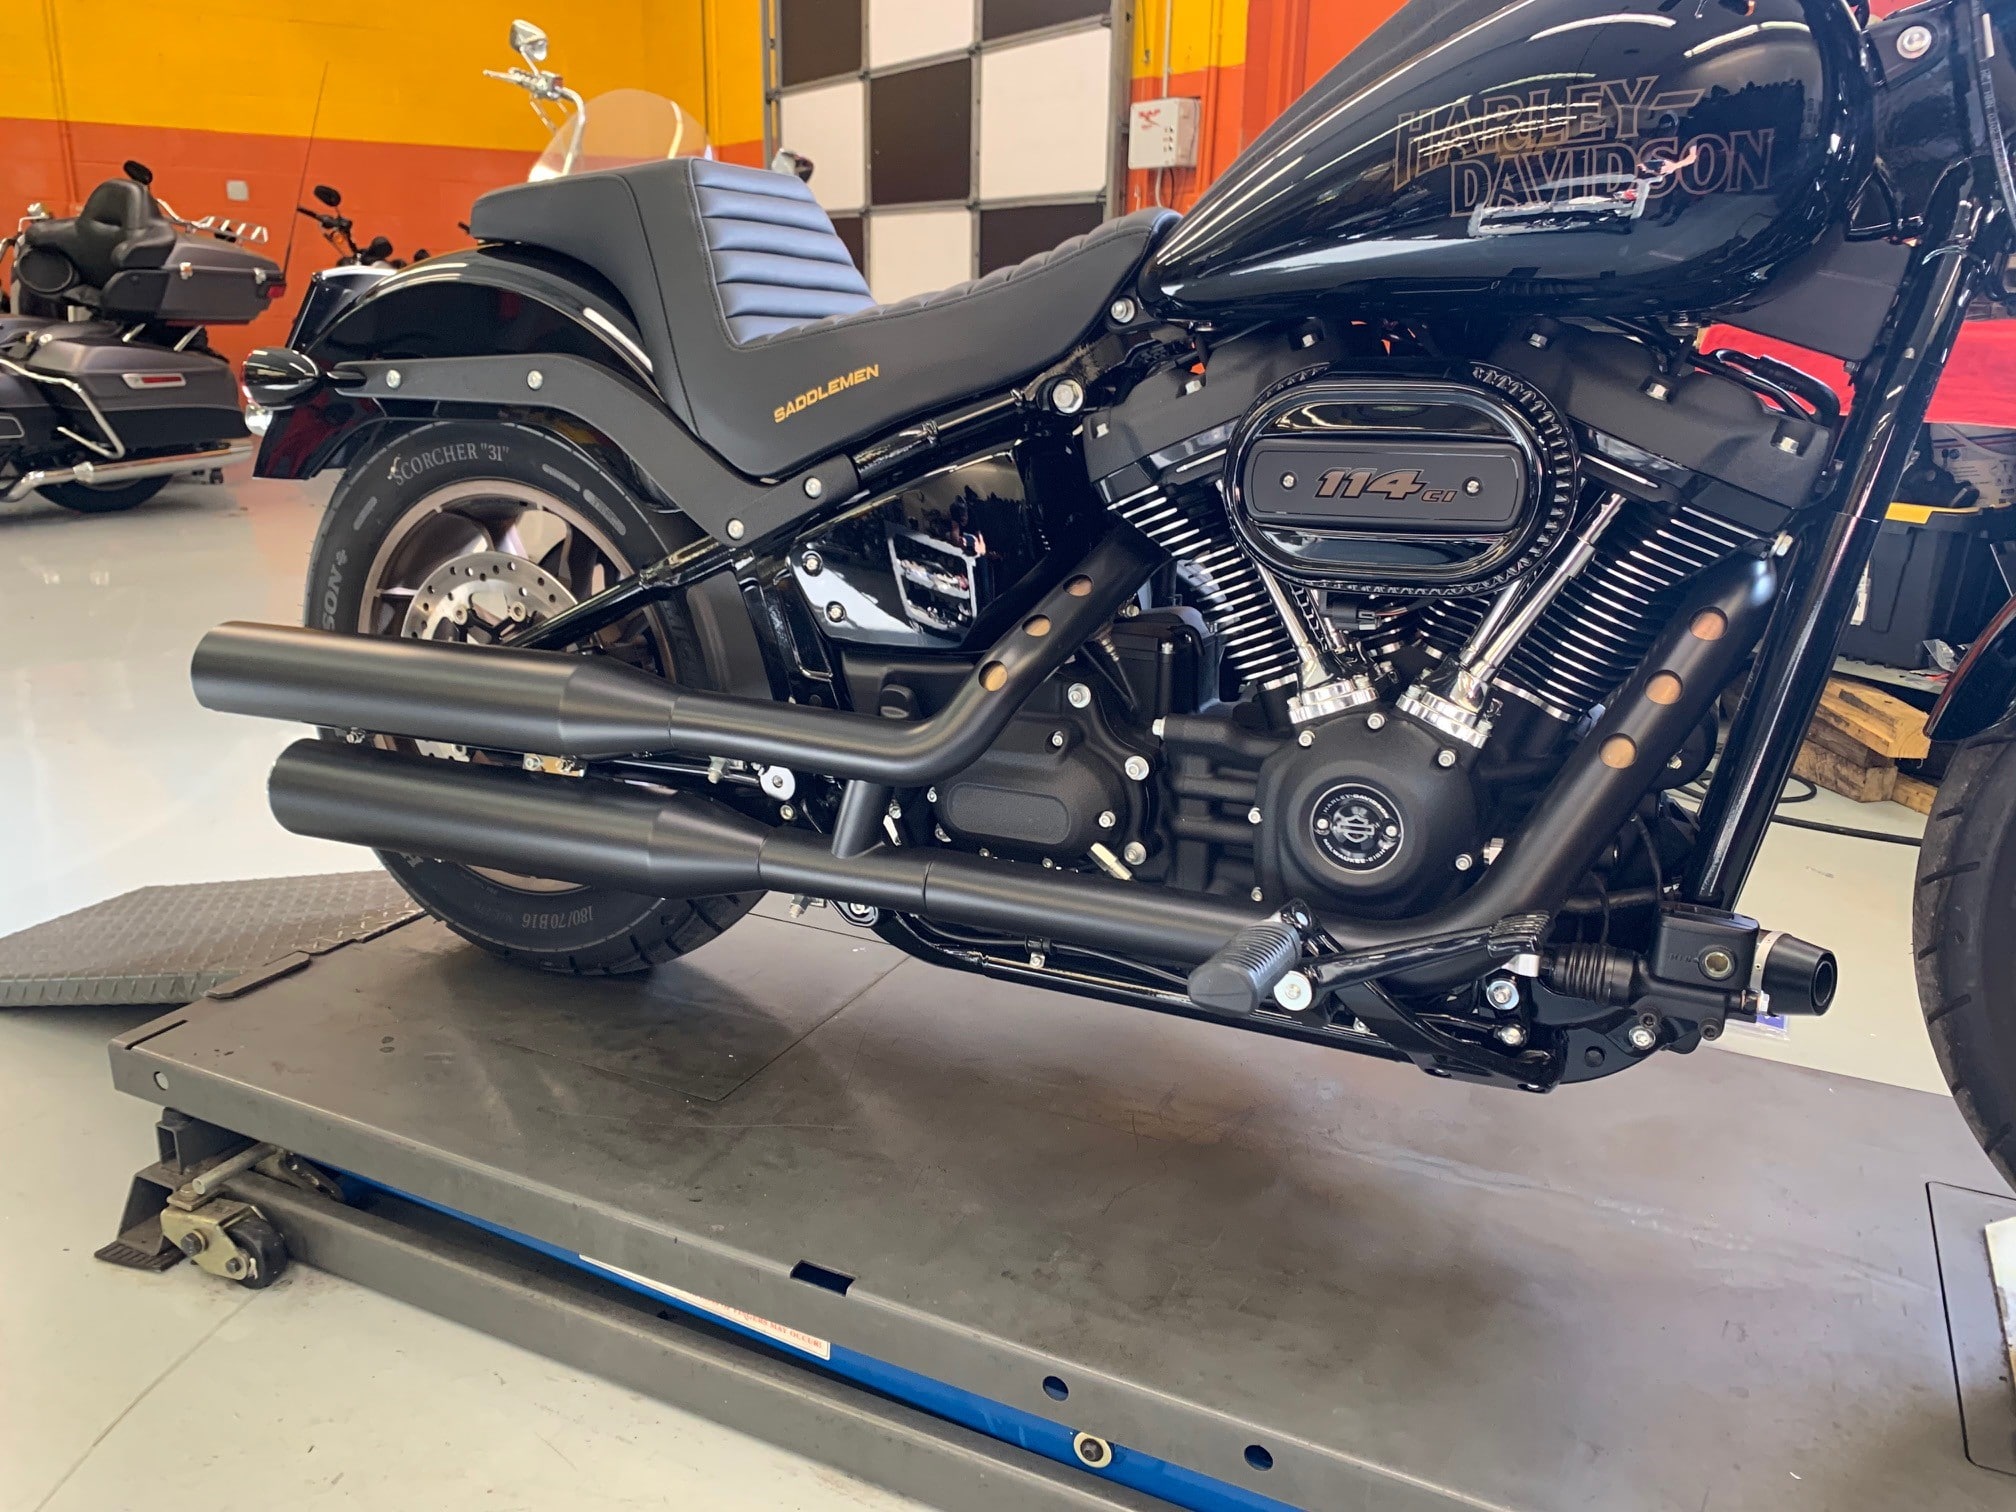 Our Harley Davidson 2020 Lowrider S Project Bolt On V Twin Visionary